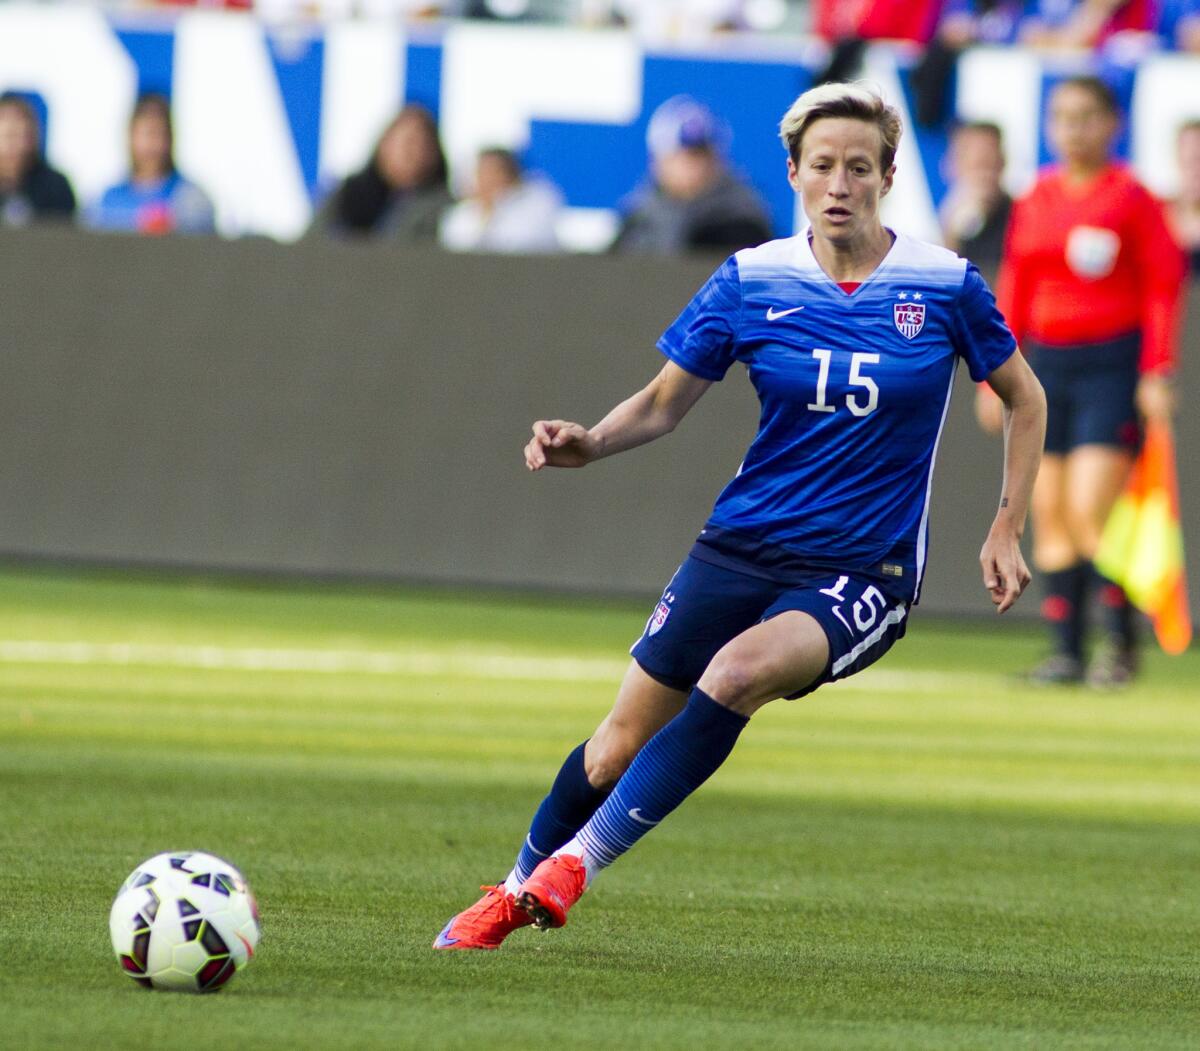 United States midfielder Megan Rapinoe dribbles against Mexico during a friendly in Carson, Calif., in 2015. Rapinoe, openly gay, called out Brazilian fans for using an anti-gay slur during the U.S. team's Olympic match with New Zealand: "It is personally hurtful."